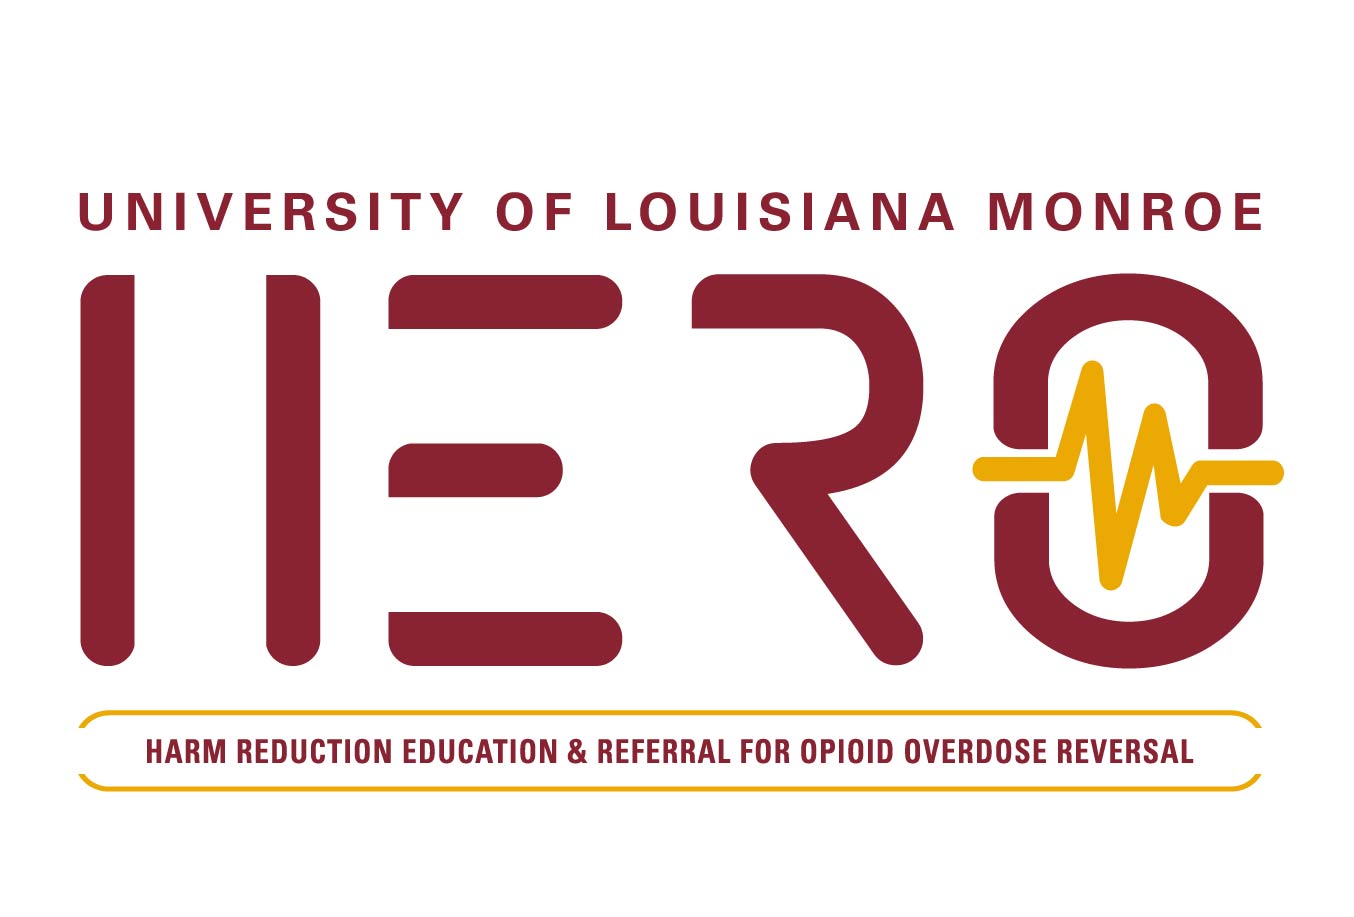 ULM HERO Program trains over 600 first responders in first year